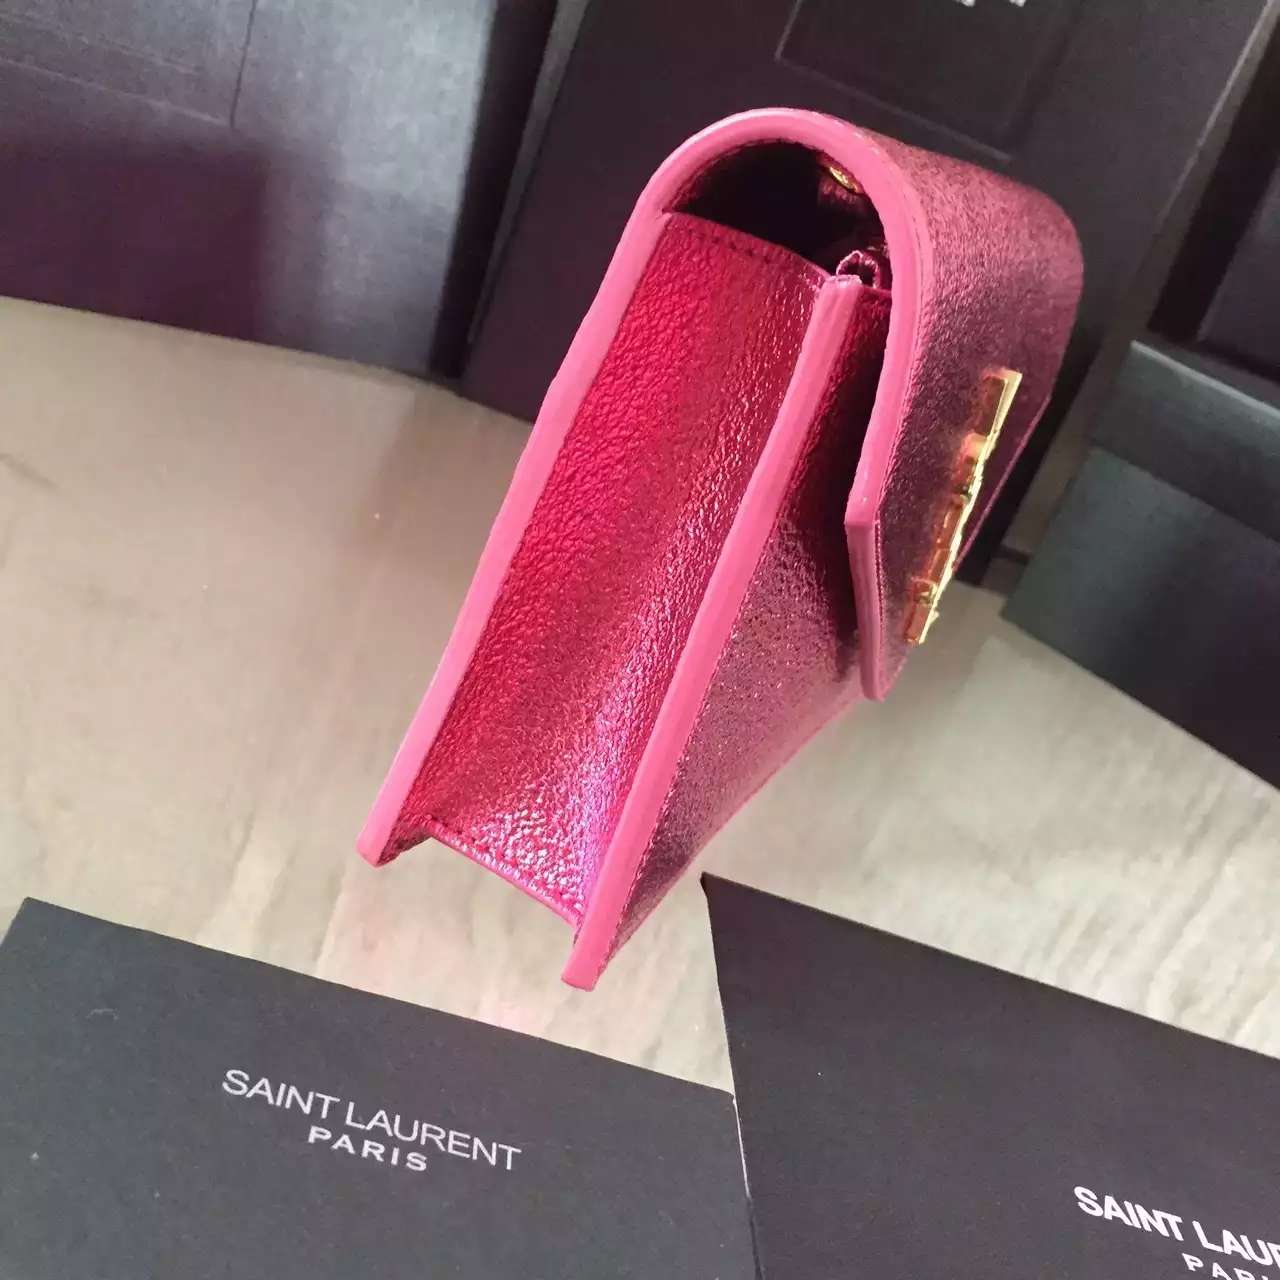 2016 Cheap YSL Out Sale with Free Shipping-Saint Laurent Monogram Envelope Chain Wallet in Lipstick Fuchsia Grain Leather - Click Image to Close